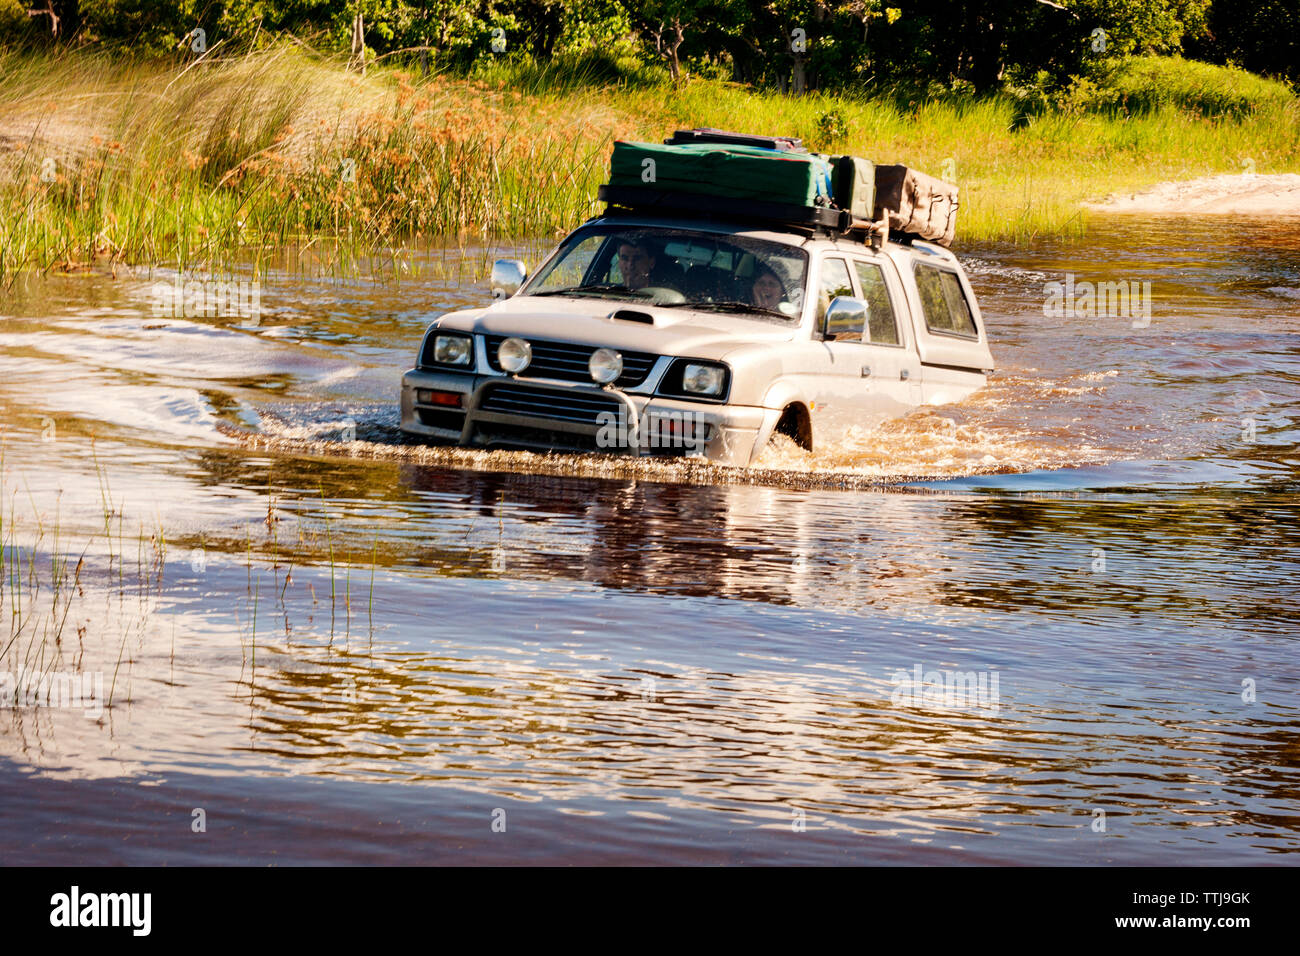 Couple enjoying off-road vehicle ride in pond Stock Photo